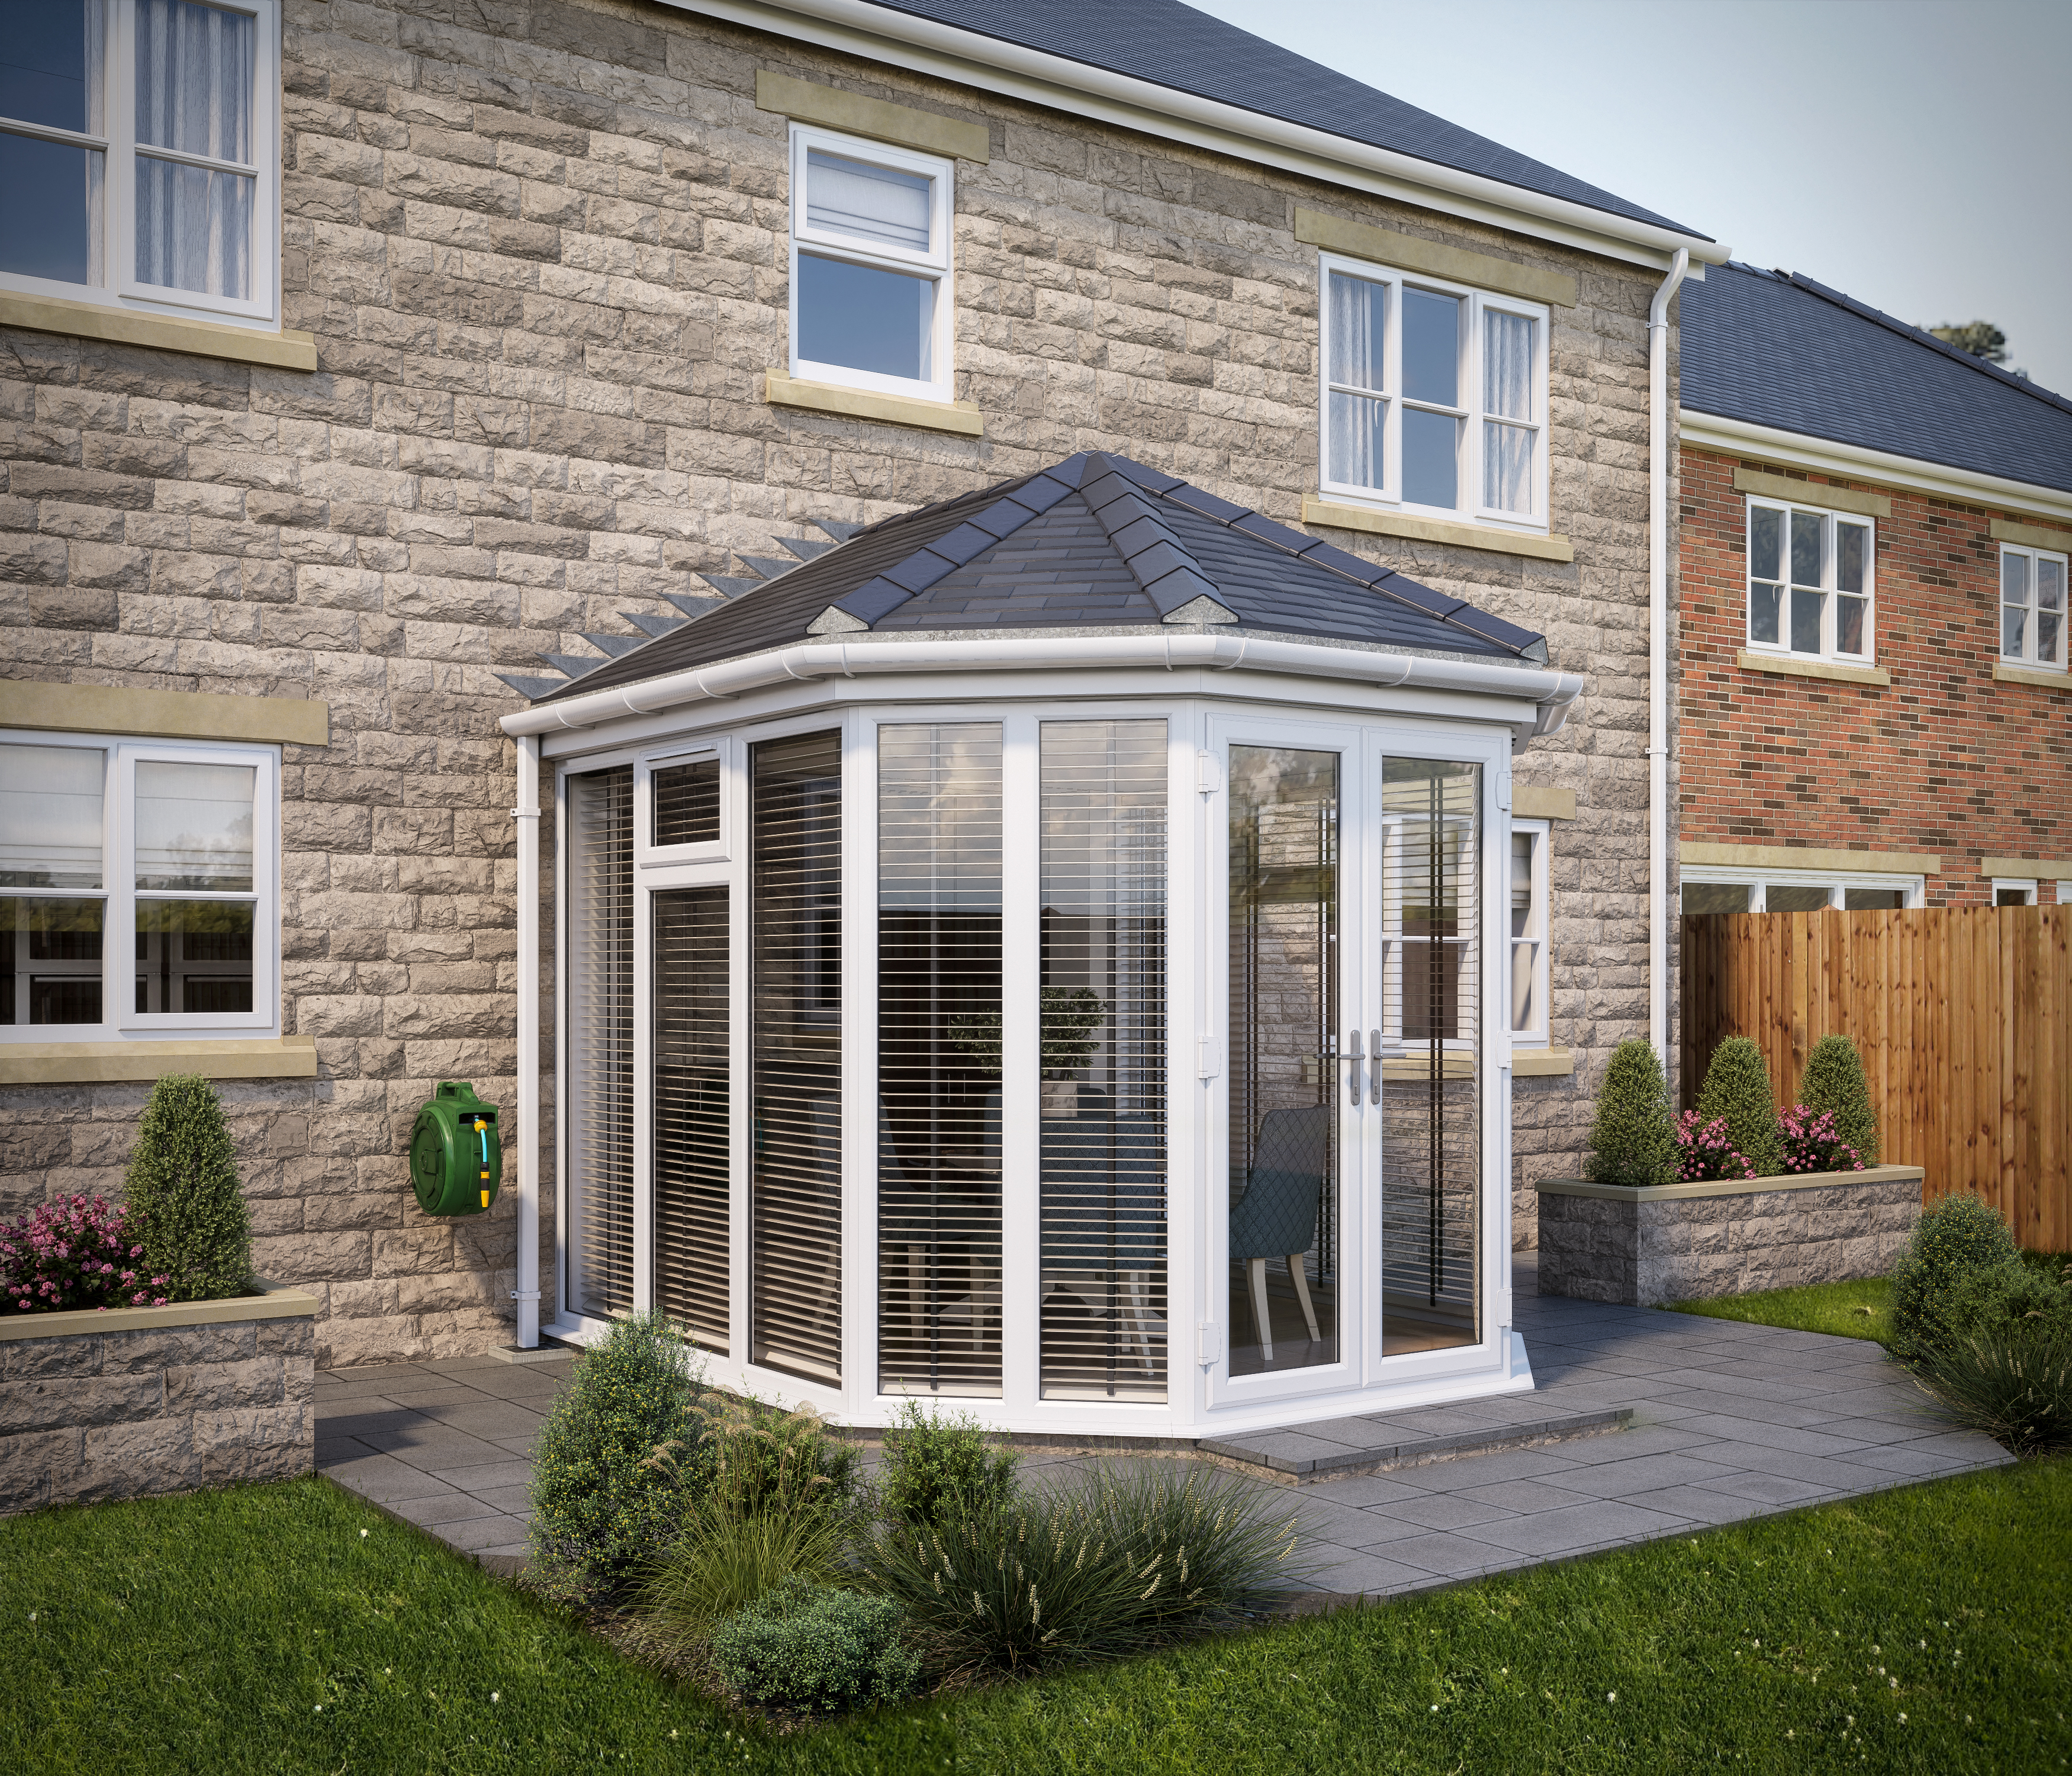 Image of SOLid Roof Full Height Victorian Conservatory White Frames with Titanium Grey Tiles - 13 x 10ft